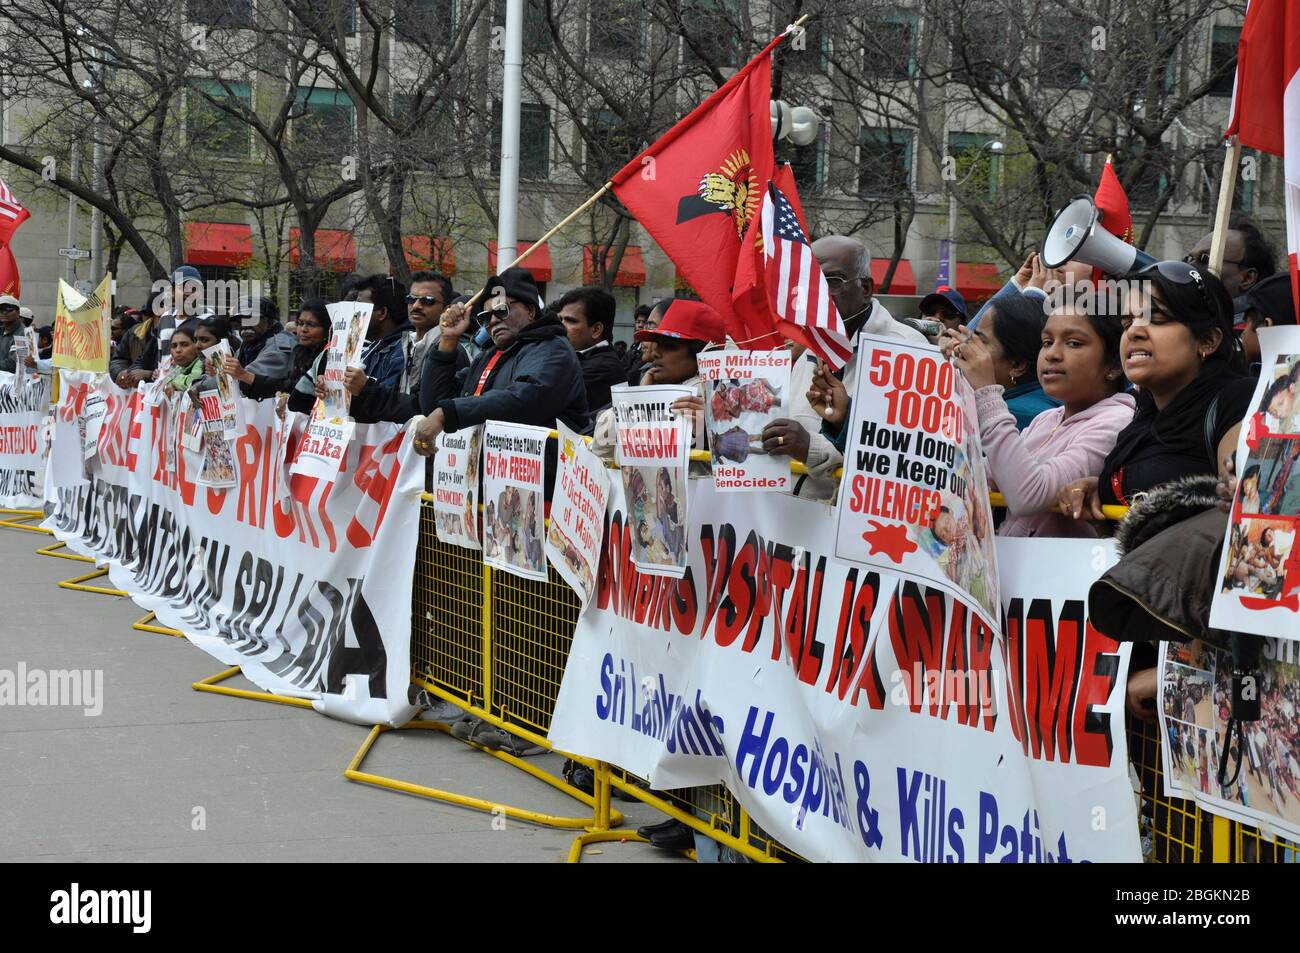 Toronto, Ontario, Canada - 05/01/2009: Protesters holding banners and placard against the Sri Lanka government on the issues on Tamils Stock Photo